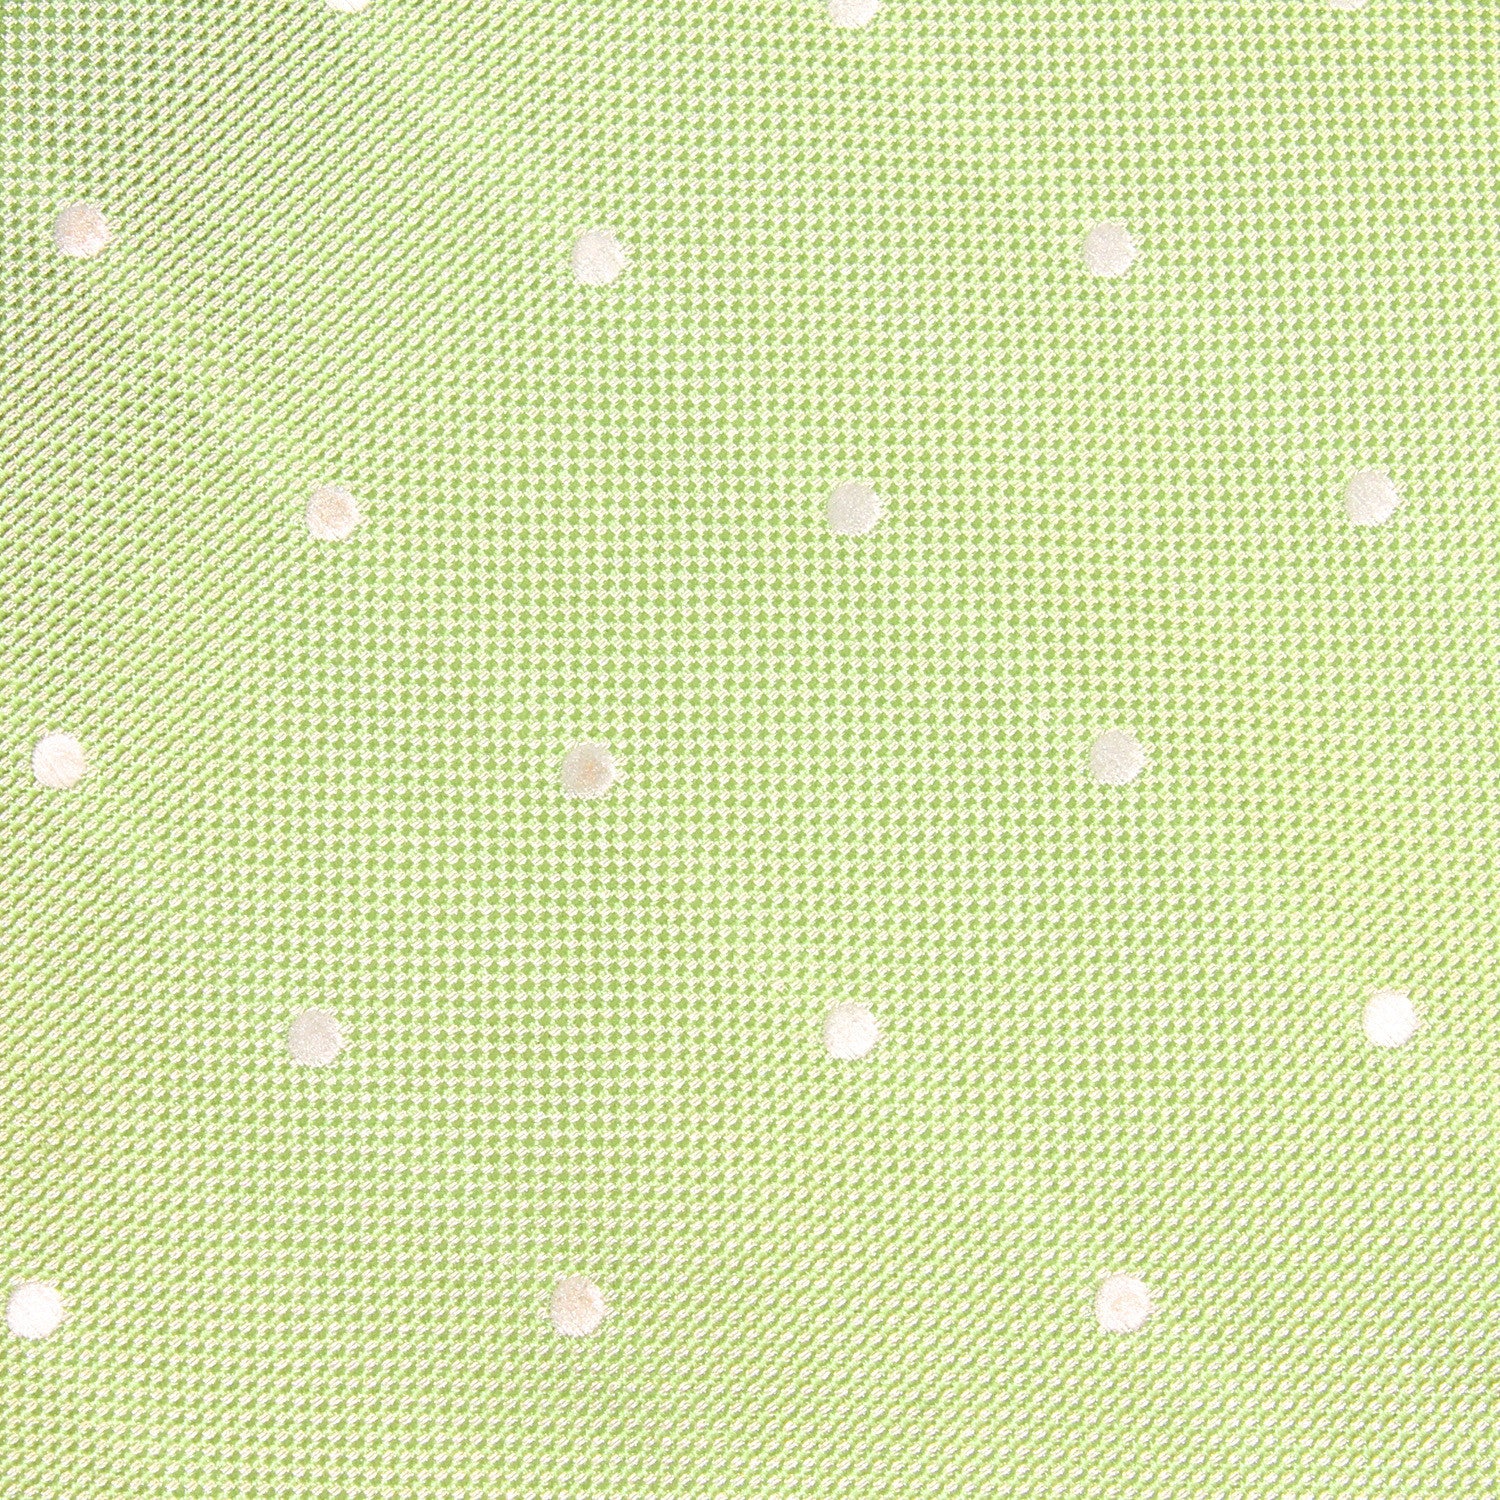 Light Mint Pistachio Green with White Polka Dots Skinny Tie Fabric